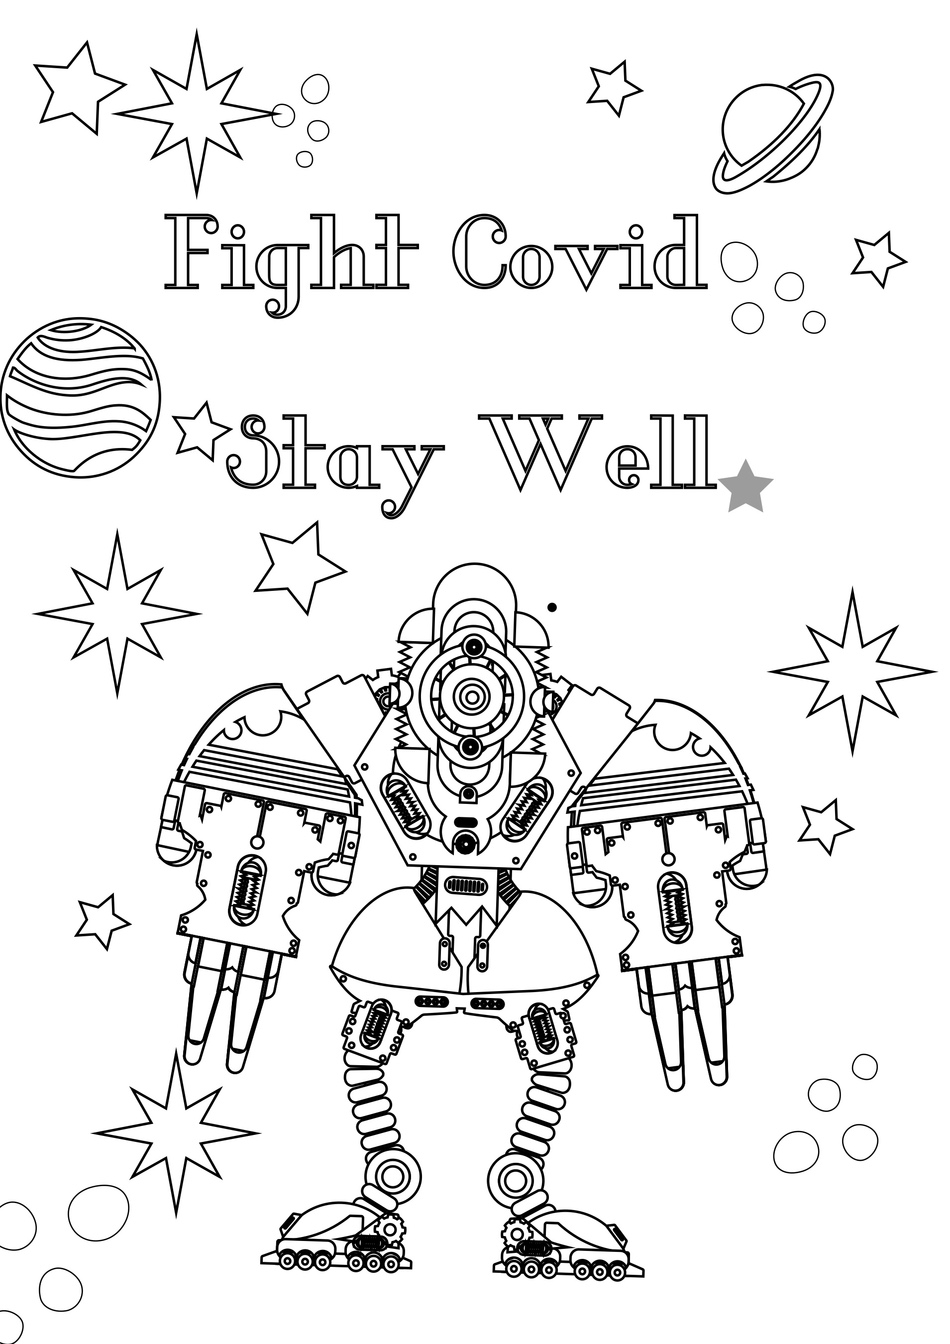 Deploy a Cyborg to Fight Covid Coloring Card